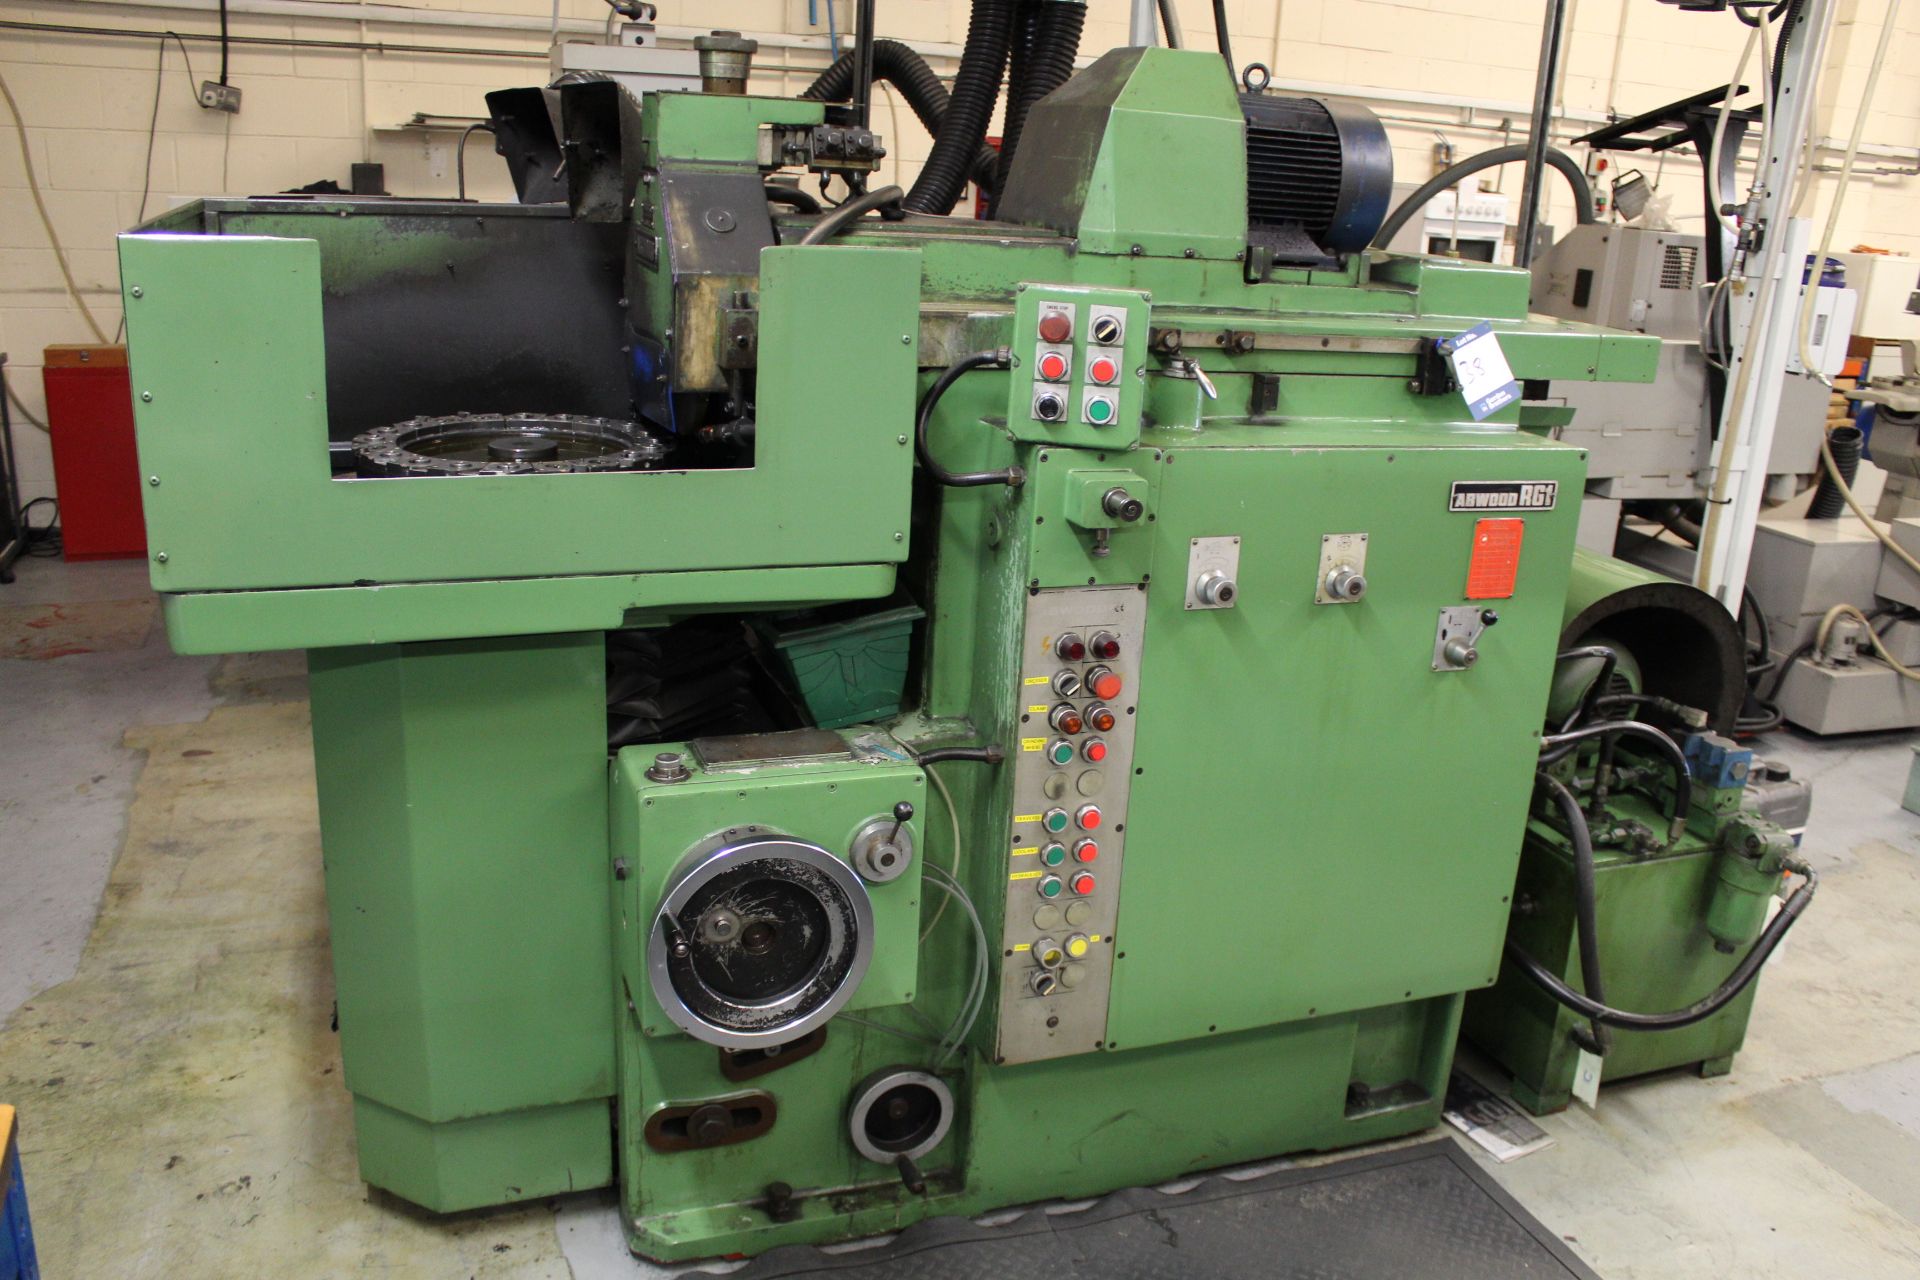 Abwood RG1 horizontal spindle rotary table surface grinder, Serial No. 195B, rotary table